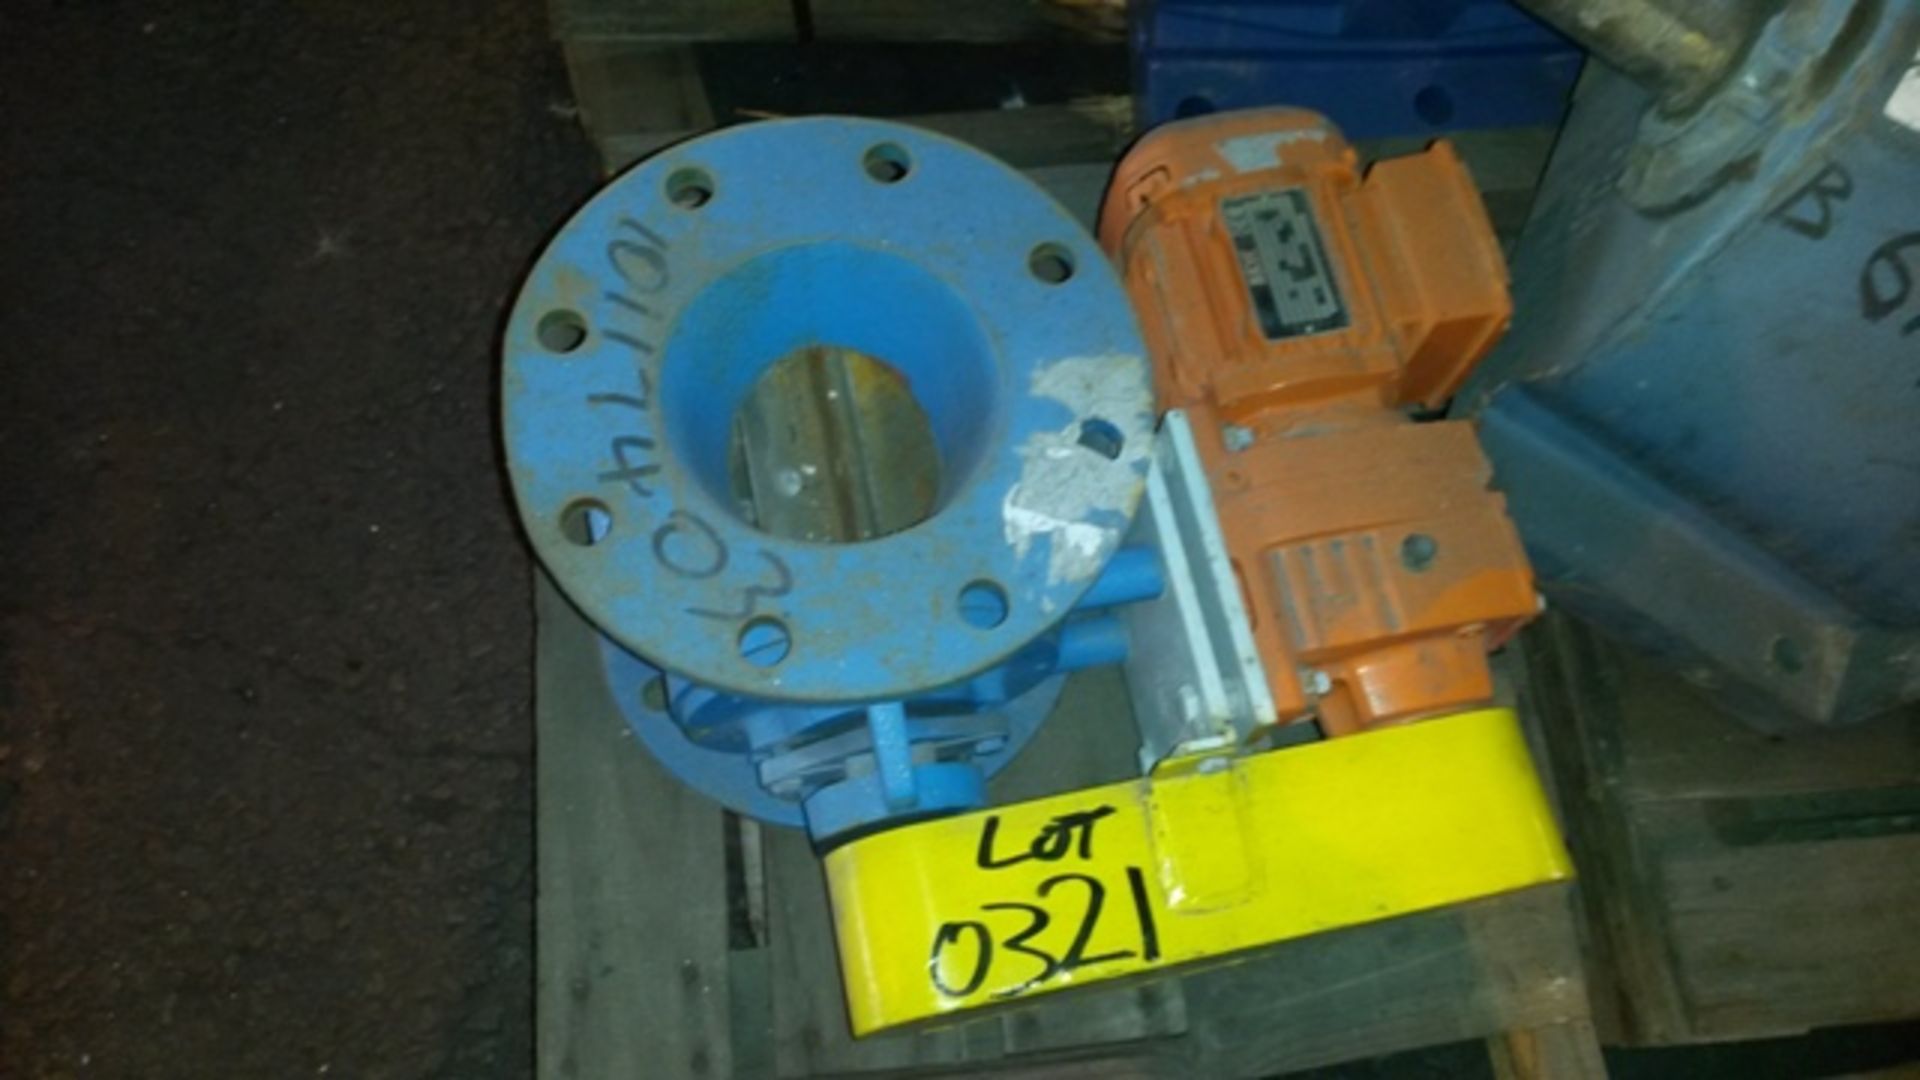 GEARBOX & ELECTRIC MOTOR PLUS FEEDER (KW 0.37, VOLT220 , AMP3.25) (LOCATED IN RICHARDS BAY, KZN)